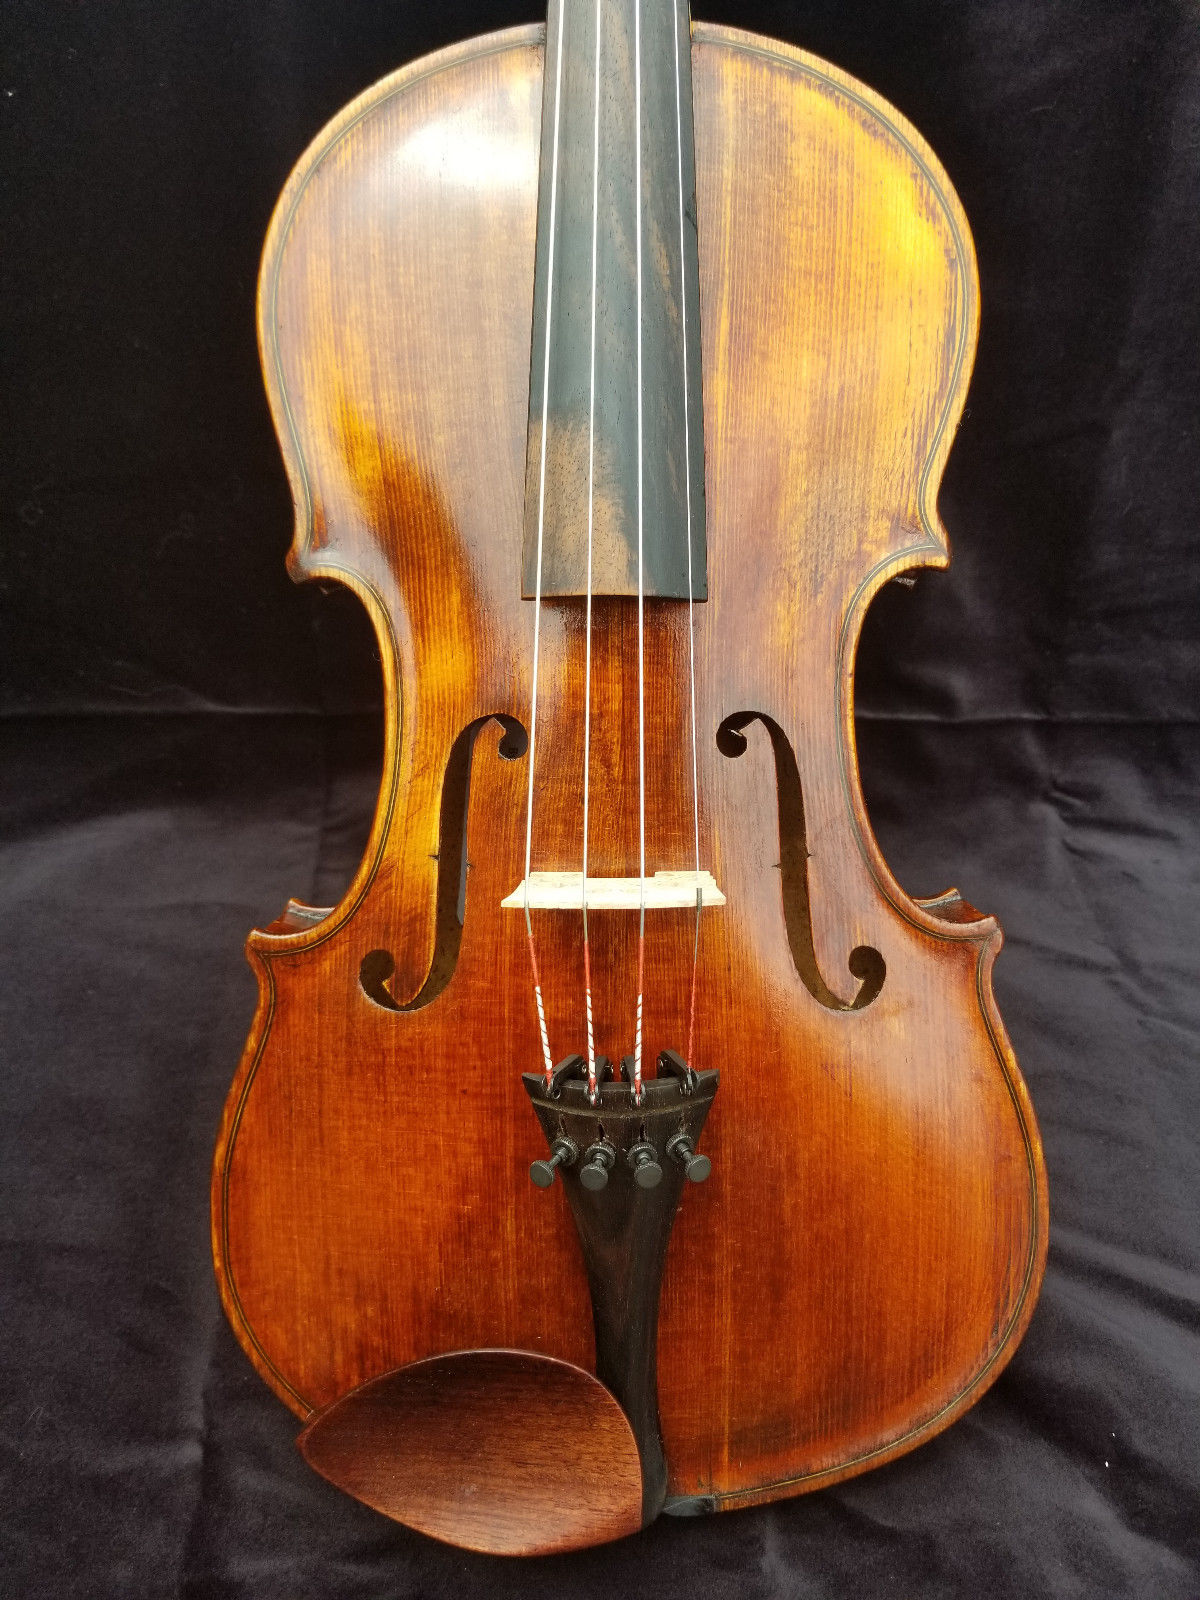 - Antique 1800's French violin made by Francois Aldric 4/4 Violin RESTORED - auction details